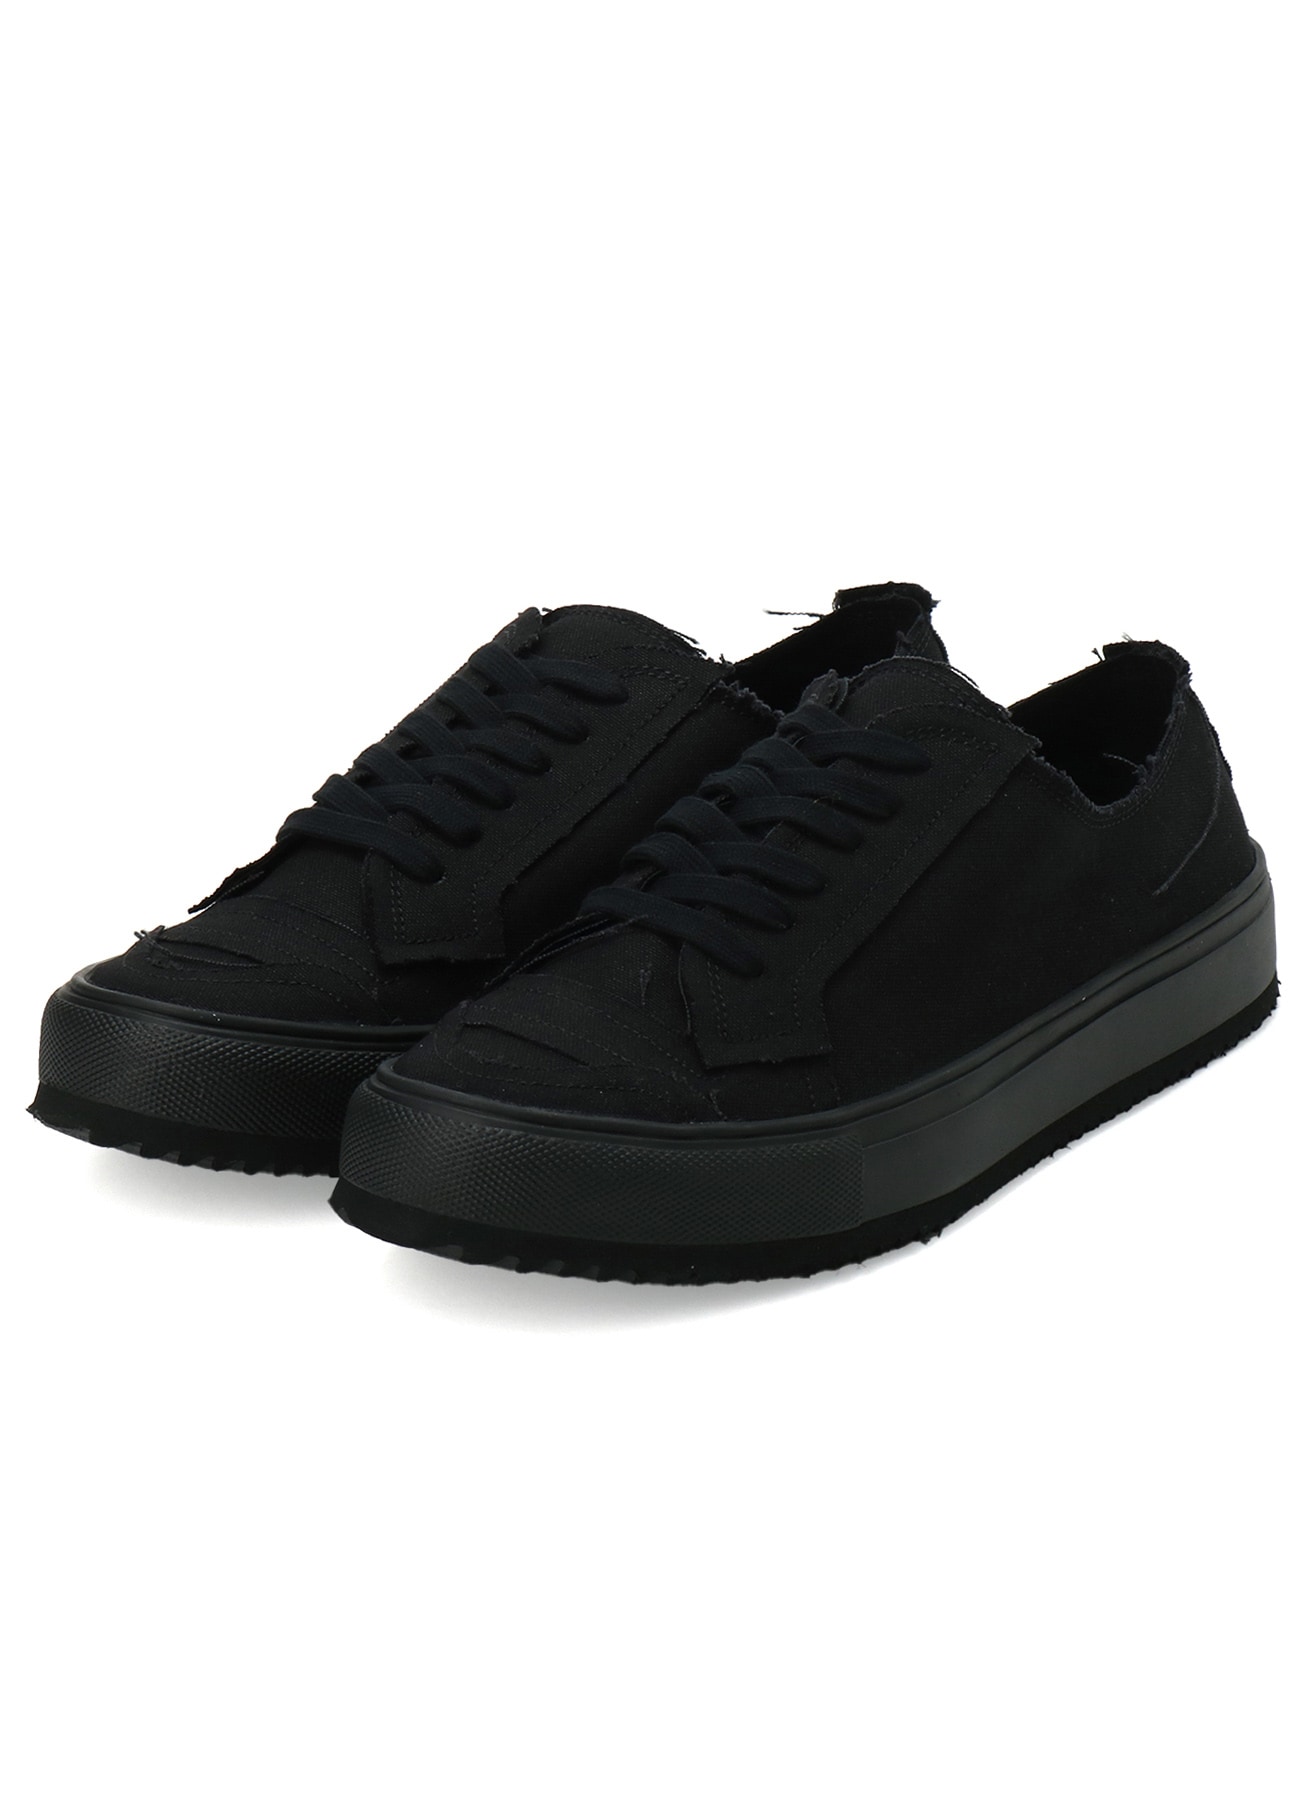 C/9 CANVAS A LOW TOP SNEAKER A